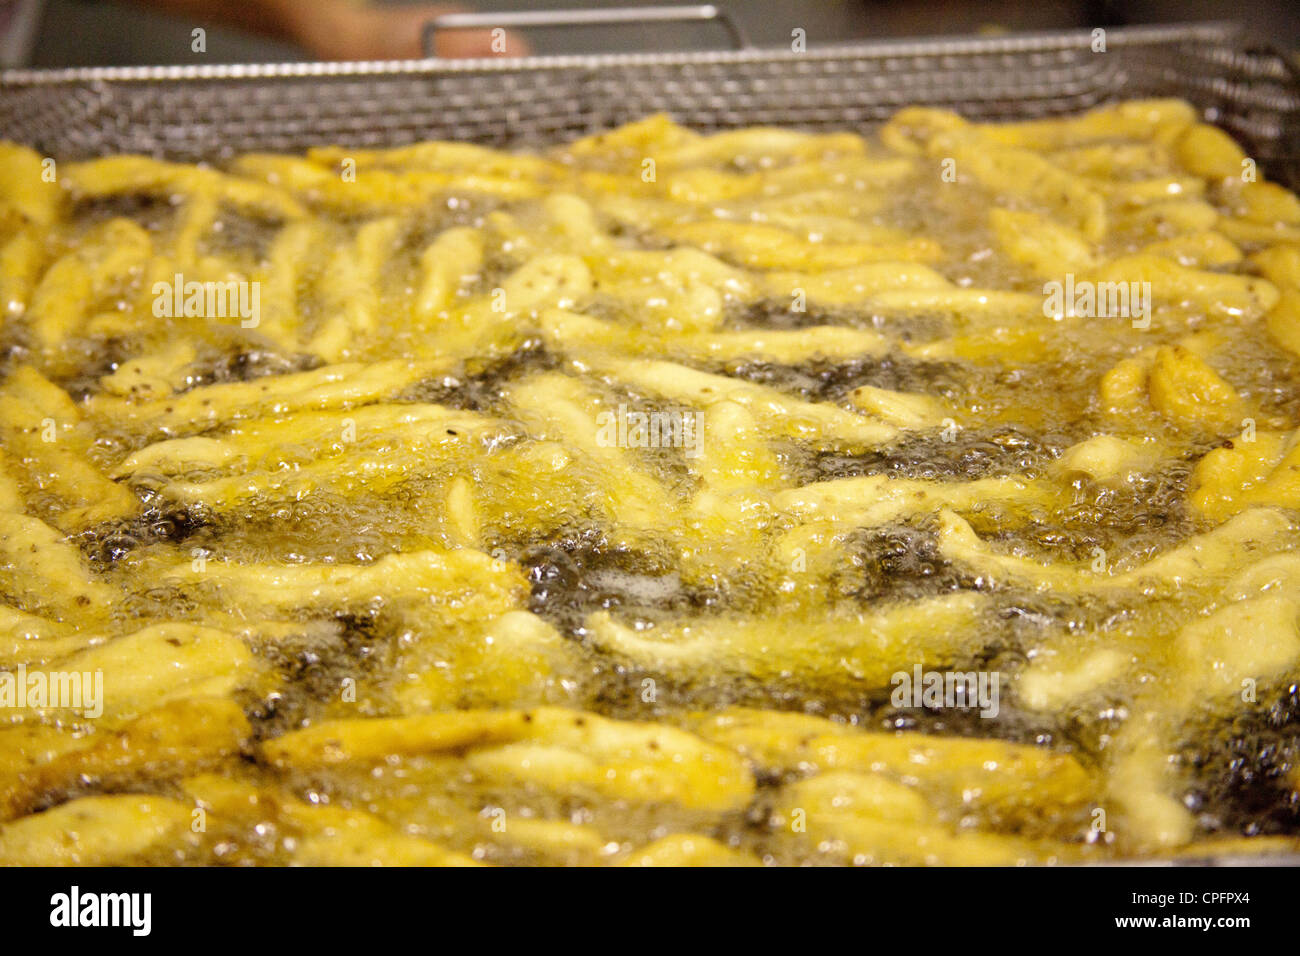 Elaboration artisanal pastry fritters La Antequerana in Antequera Malaga Andalusia Spain Stock Photo